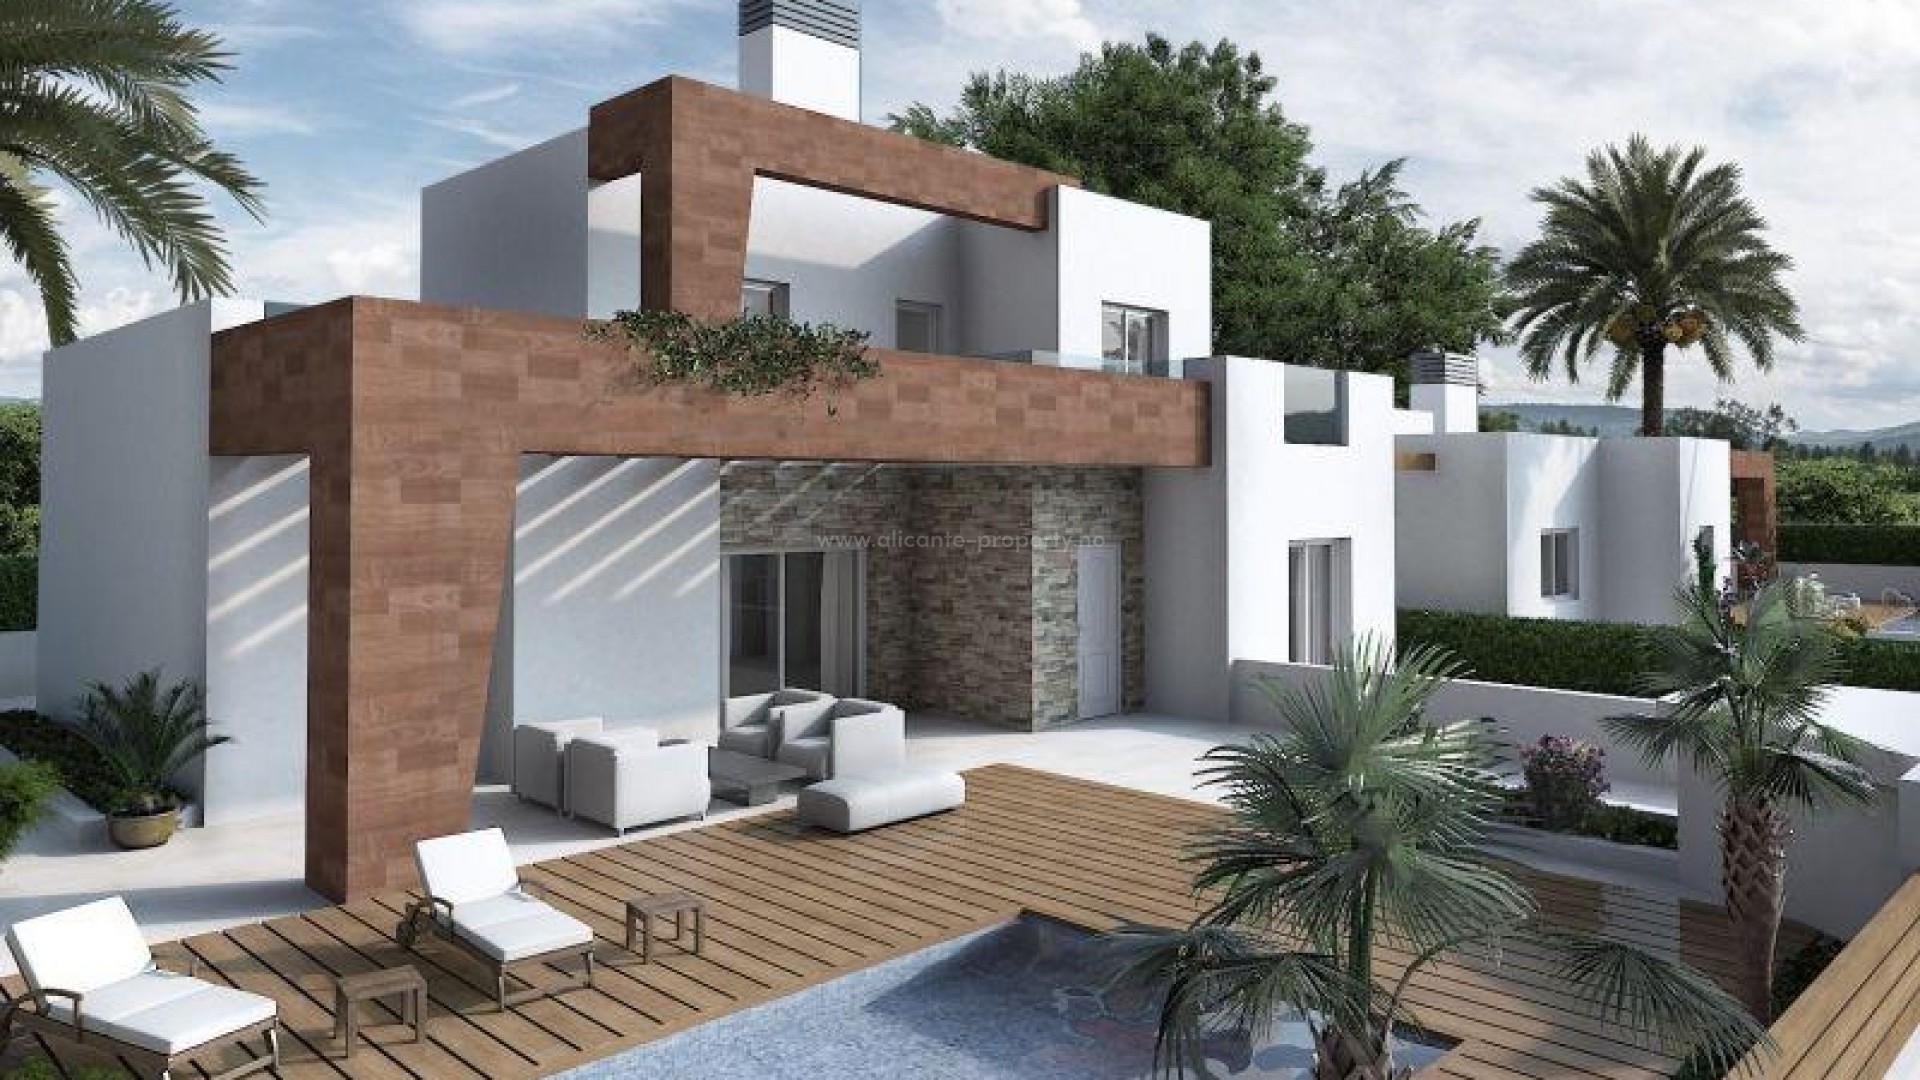 The house/villa is located in Los Altos, 5 minutes to Playa Punta Prima, 3 double bedrooms, 4 bathrooms, private pool, solarium/terrace. Nice residential area